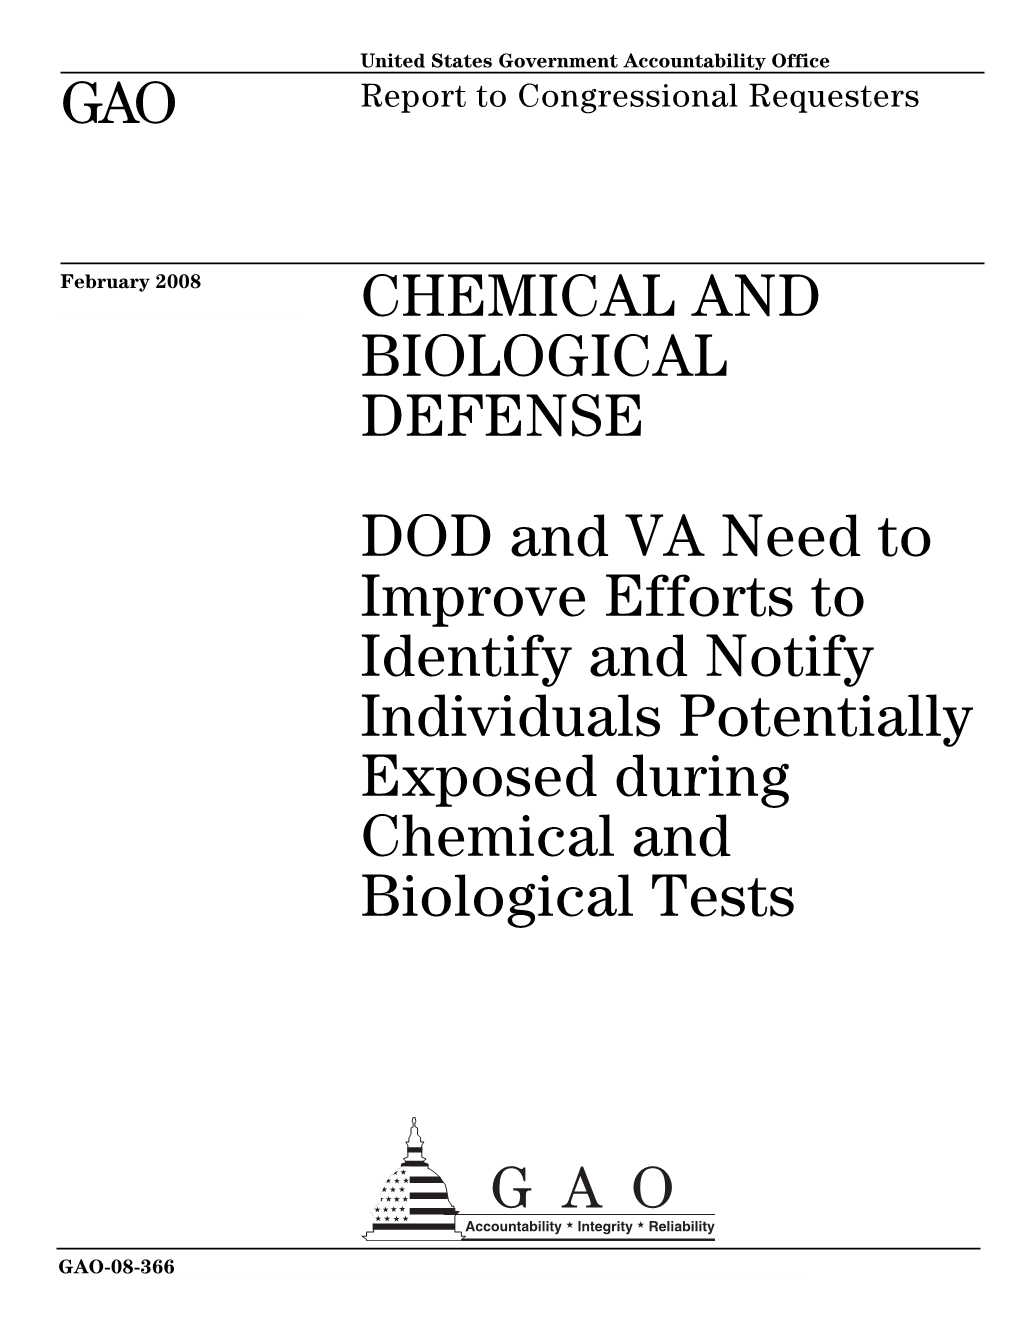 GAO-08-366 Chemical and Biological Defense: DOD and VA Need To